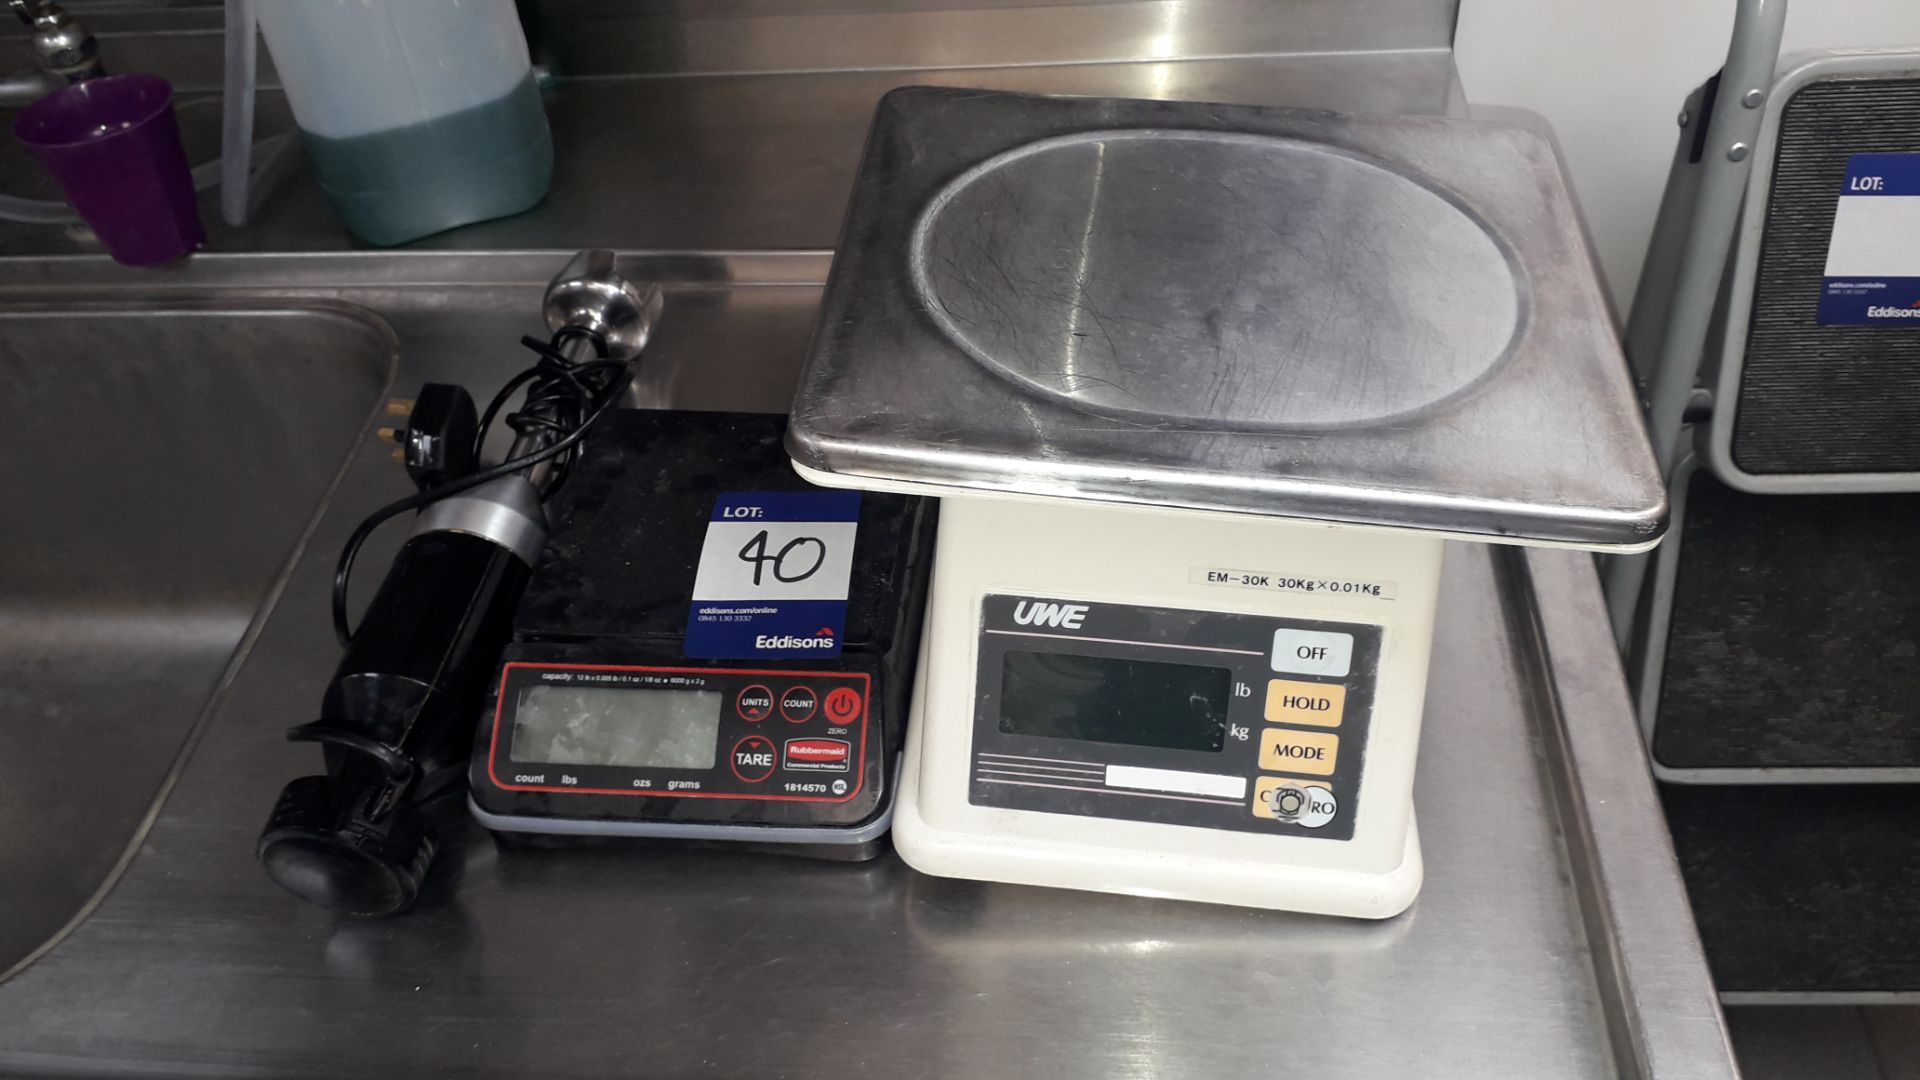 2 x Electric Platform Scales and Waring Commercial